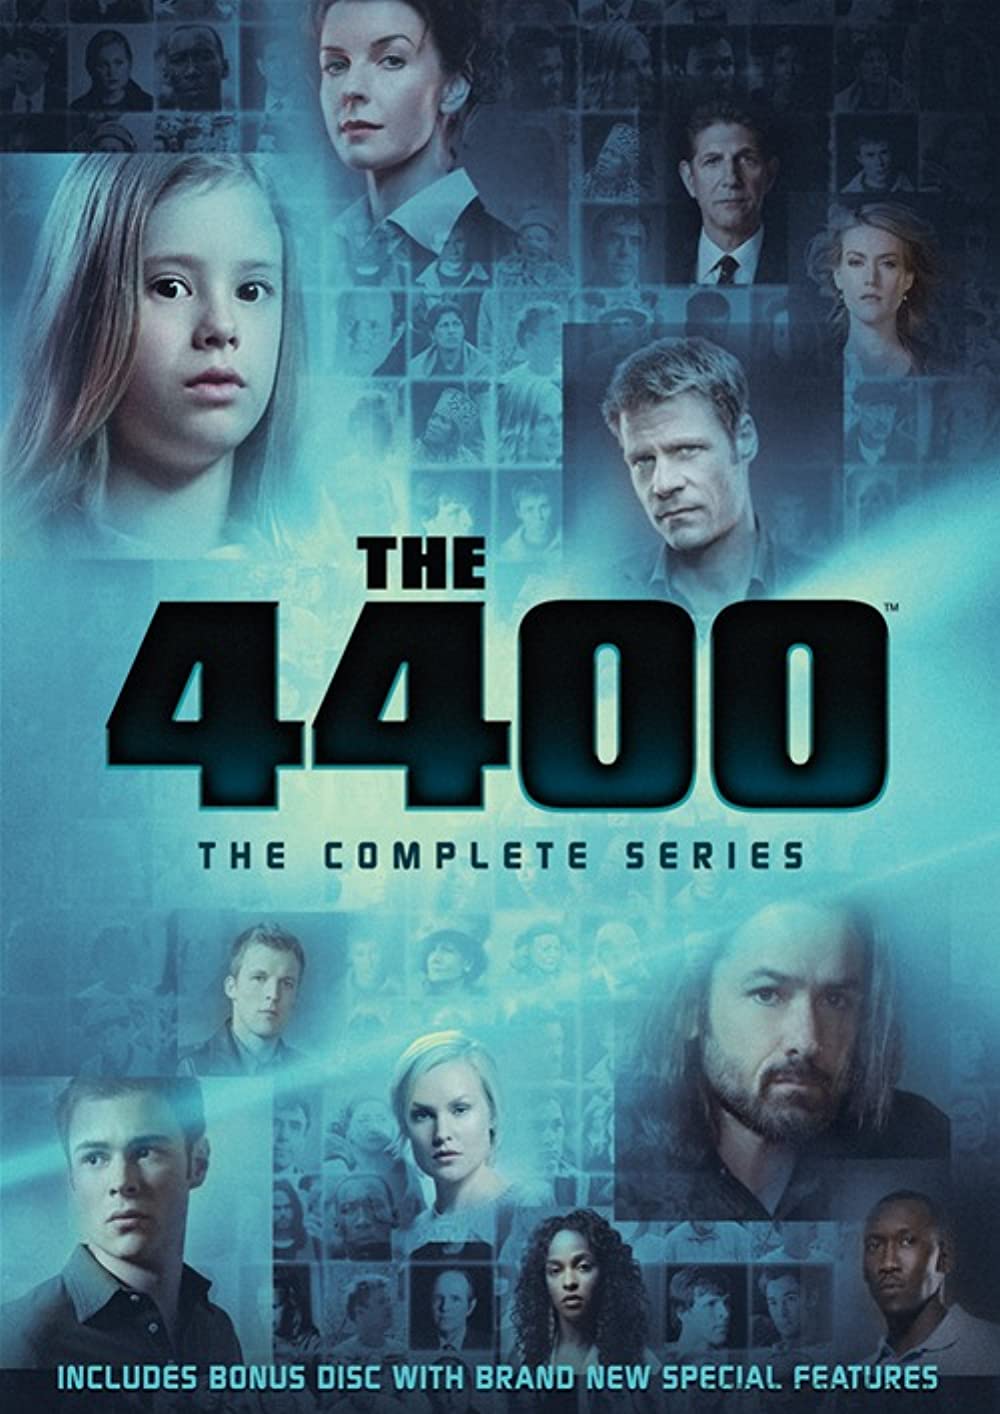 The 4400 Wallpapers